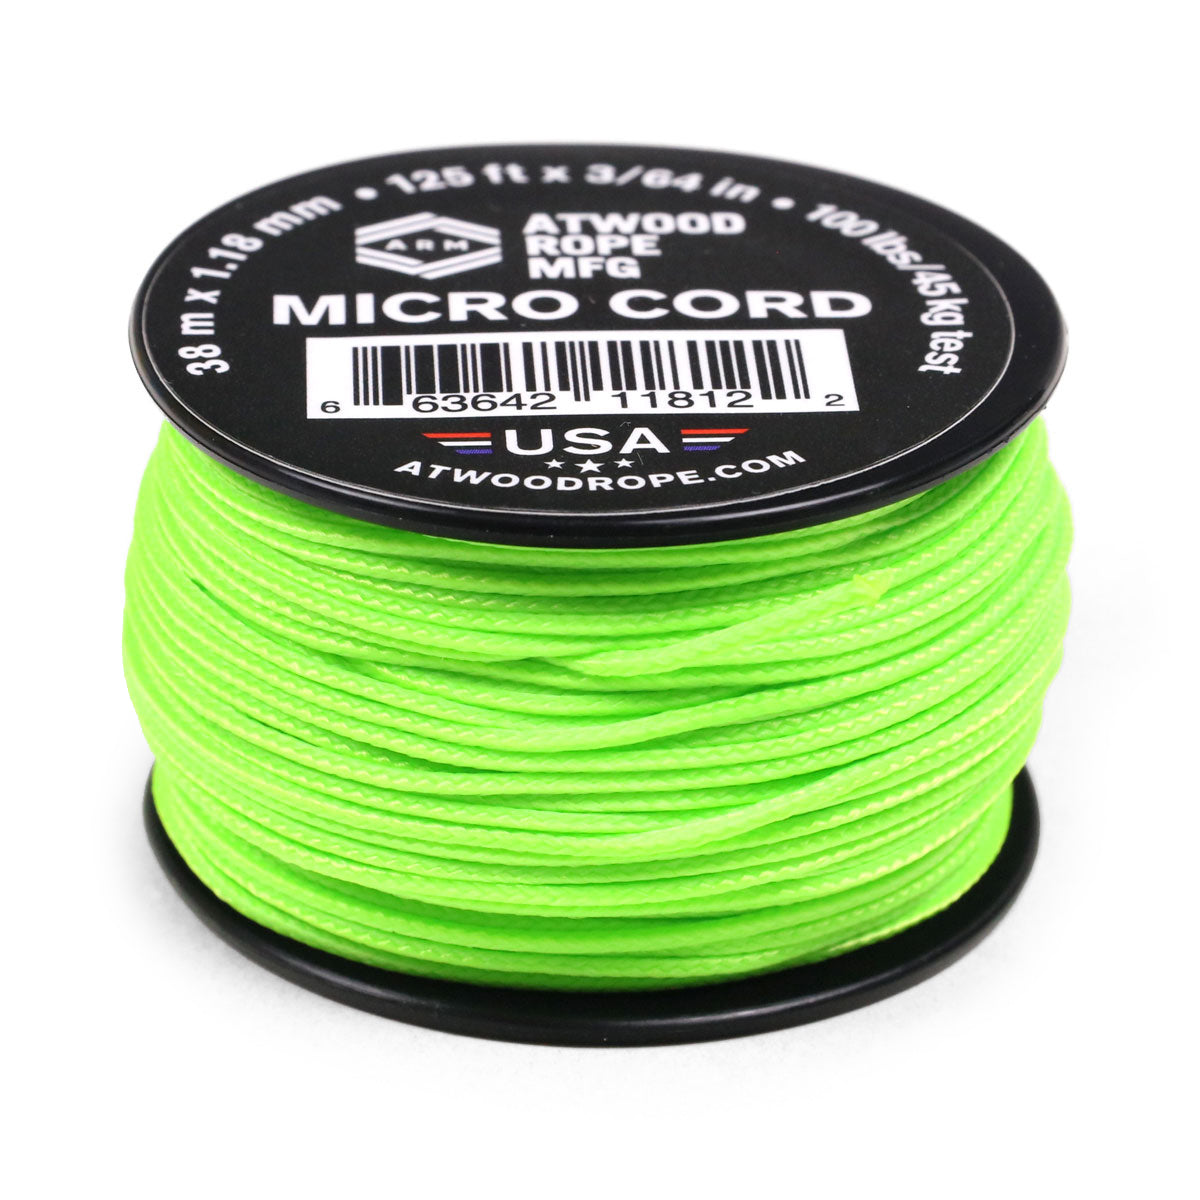 Atwood Rope MFG Tactical Nylon/Polyester Micro Utility Cord Reflective  1.18mm X 125ft Reusable Spool | Fishing Gear, Jewelry Making, Camping